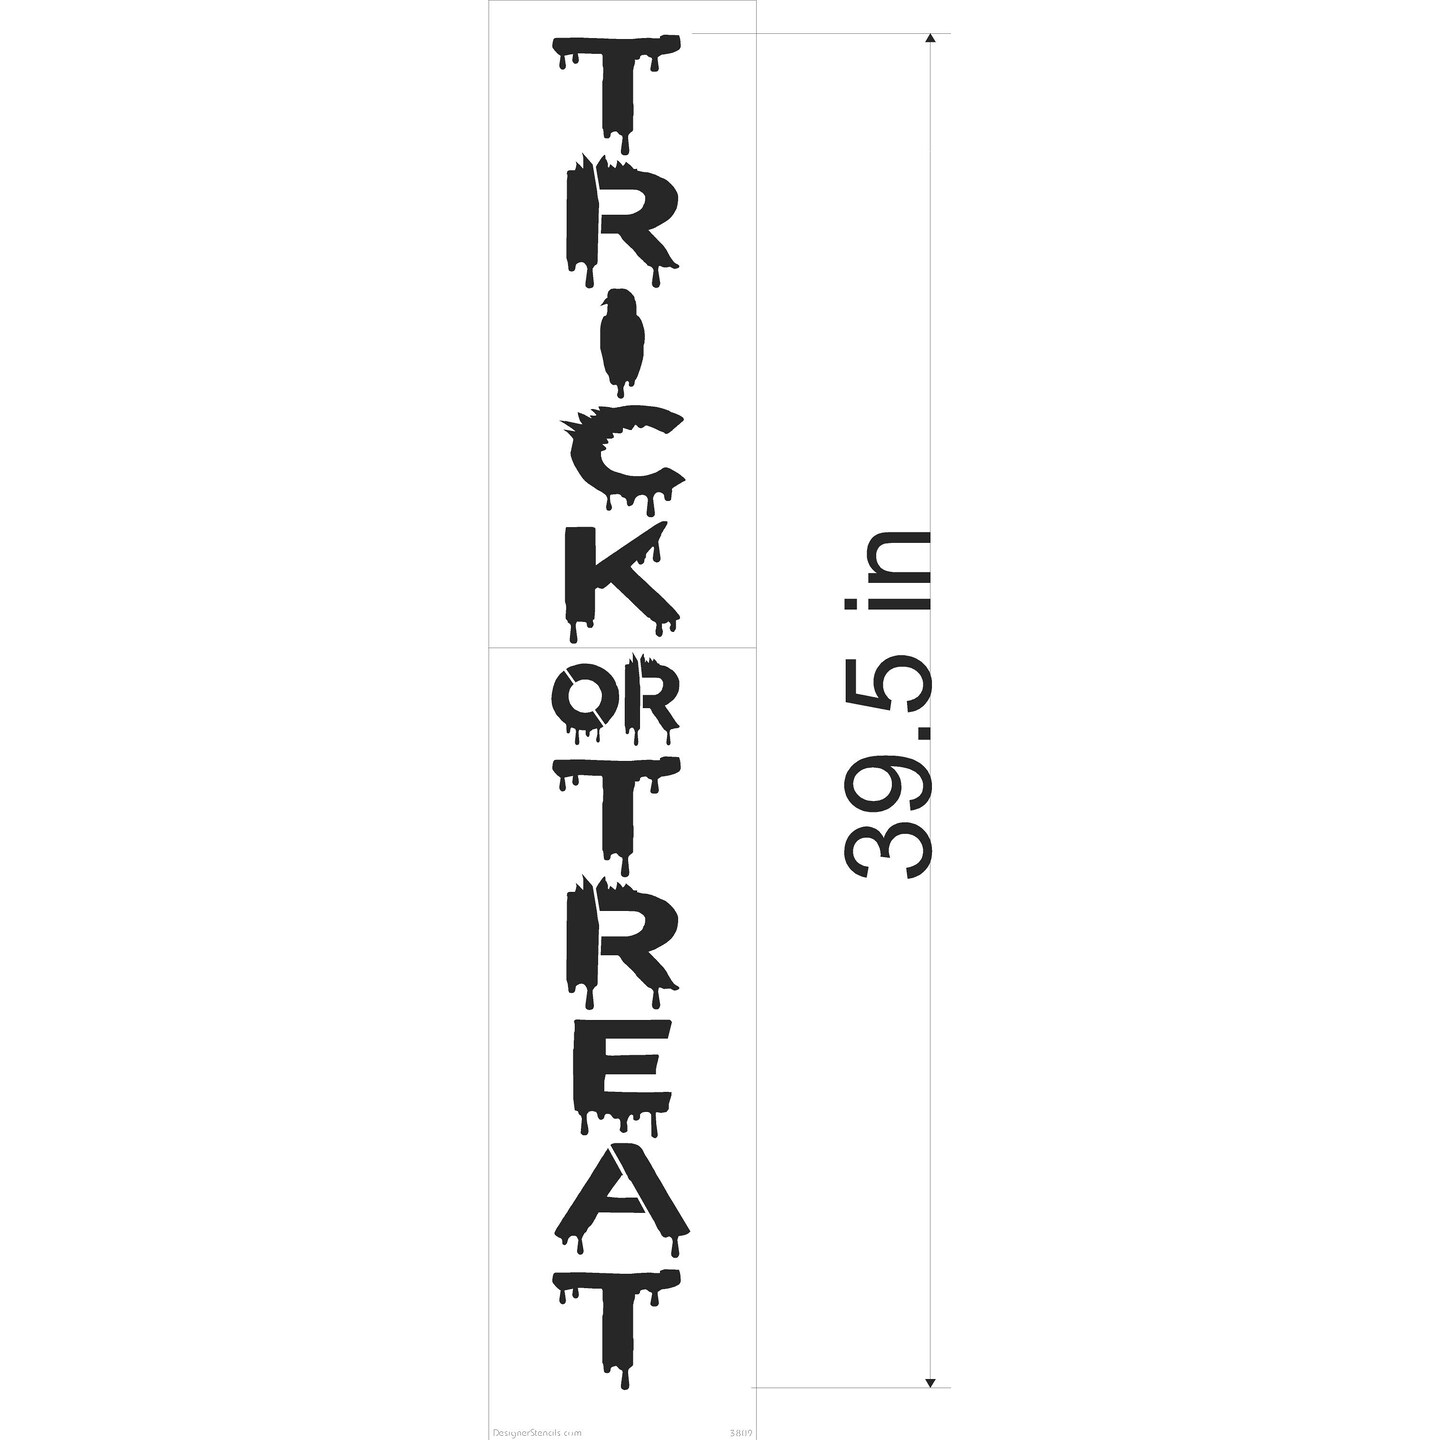 39.5-Inch Trick or Treat Tall Wall Stencil | 3809 by Designer Stencils | Word &#x26; Phrase Stencils | Reusable Art Craft Stencils for Painting on Walls, Canvas, Wood | Reusable Plastic Paint Stencil for Home Makeover | Easy to Use &#x26; Clean Art Stencil